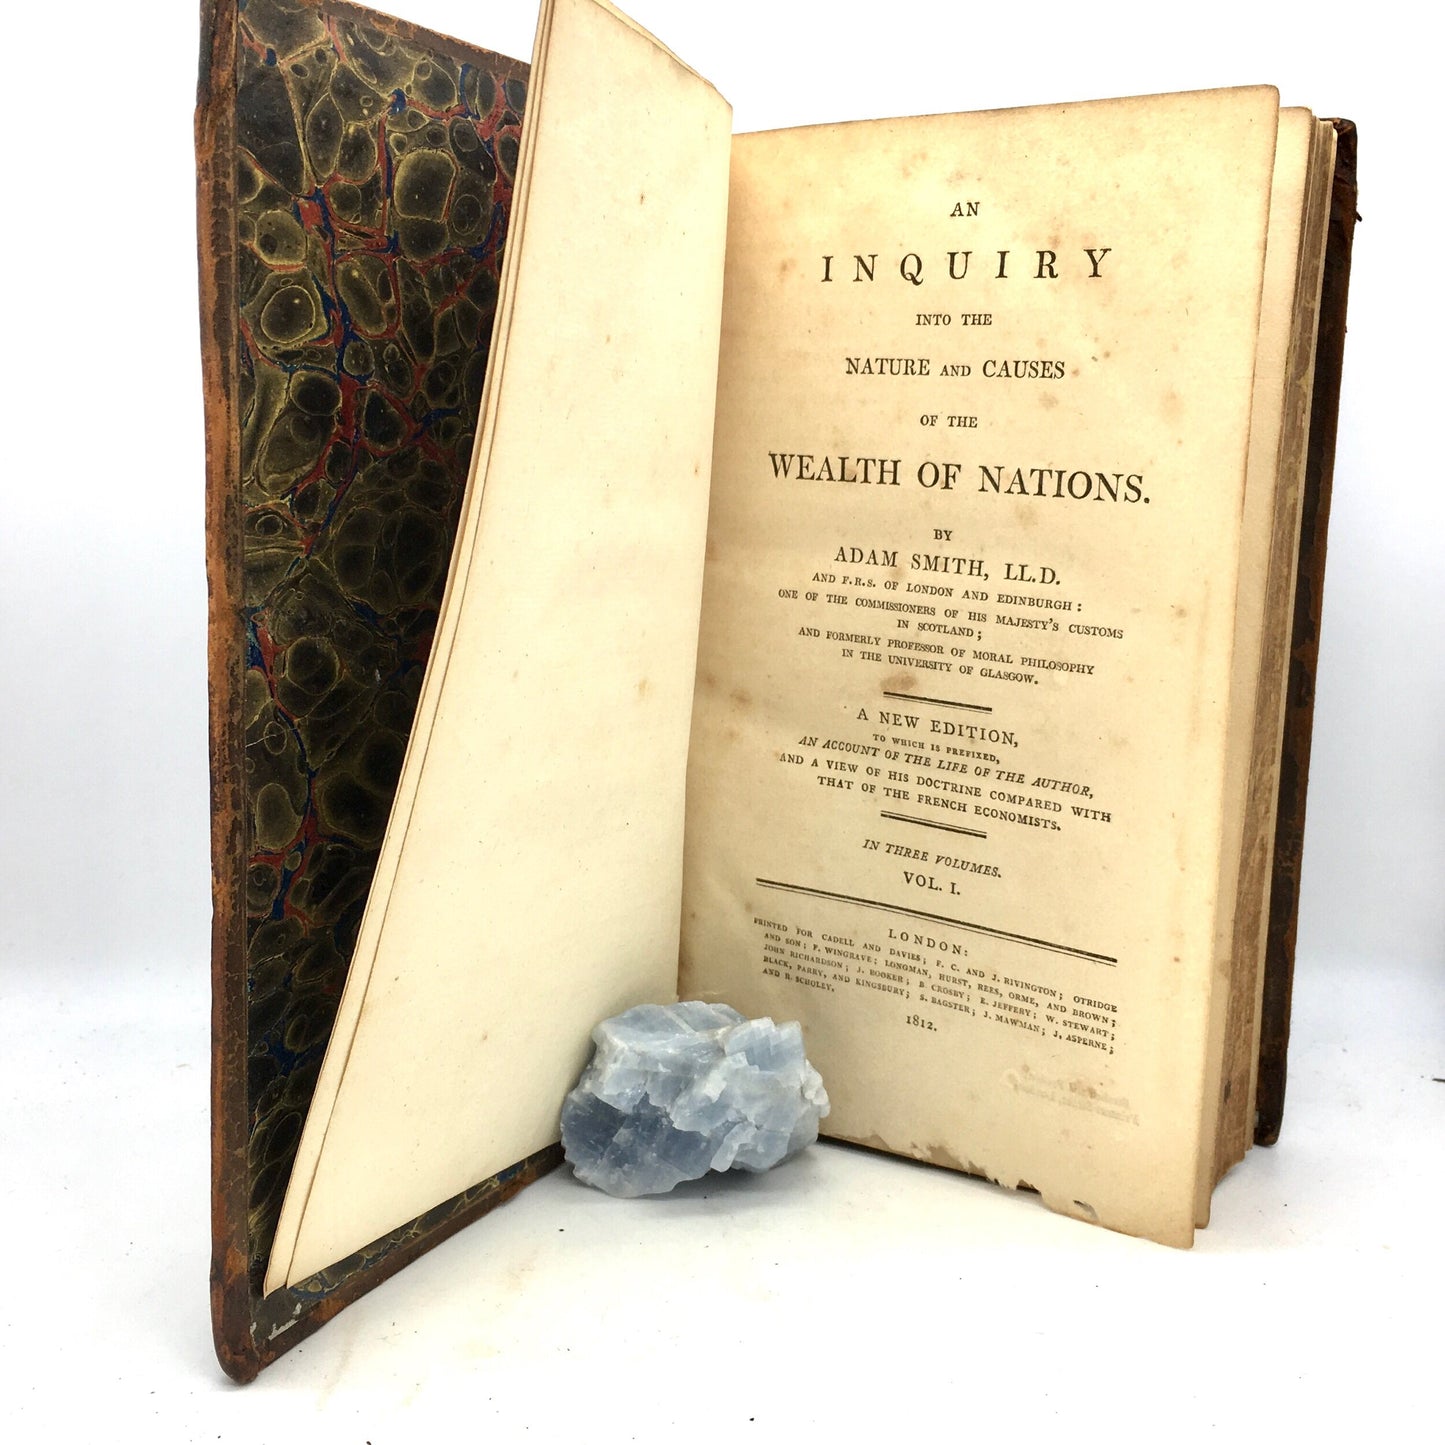 SMITH, Adam "An Inquiry into the Nature and Causes of the Wealth of Nations" [London: 1812] - Buzz Bookstore